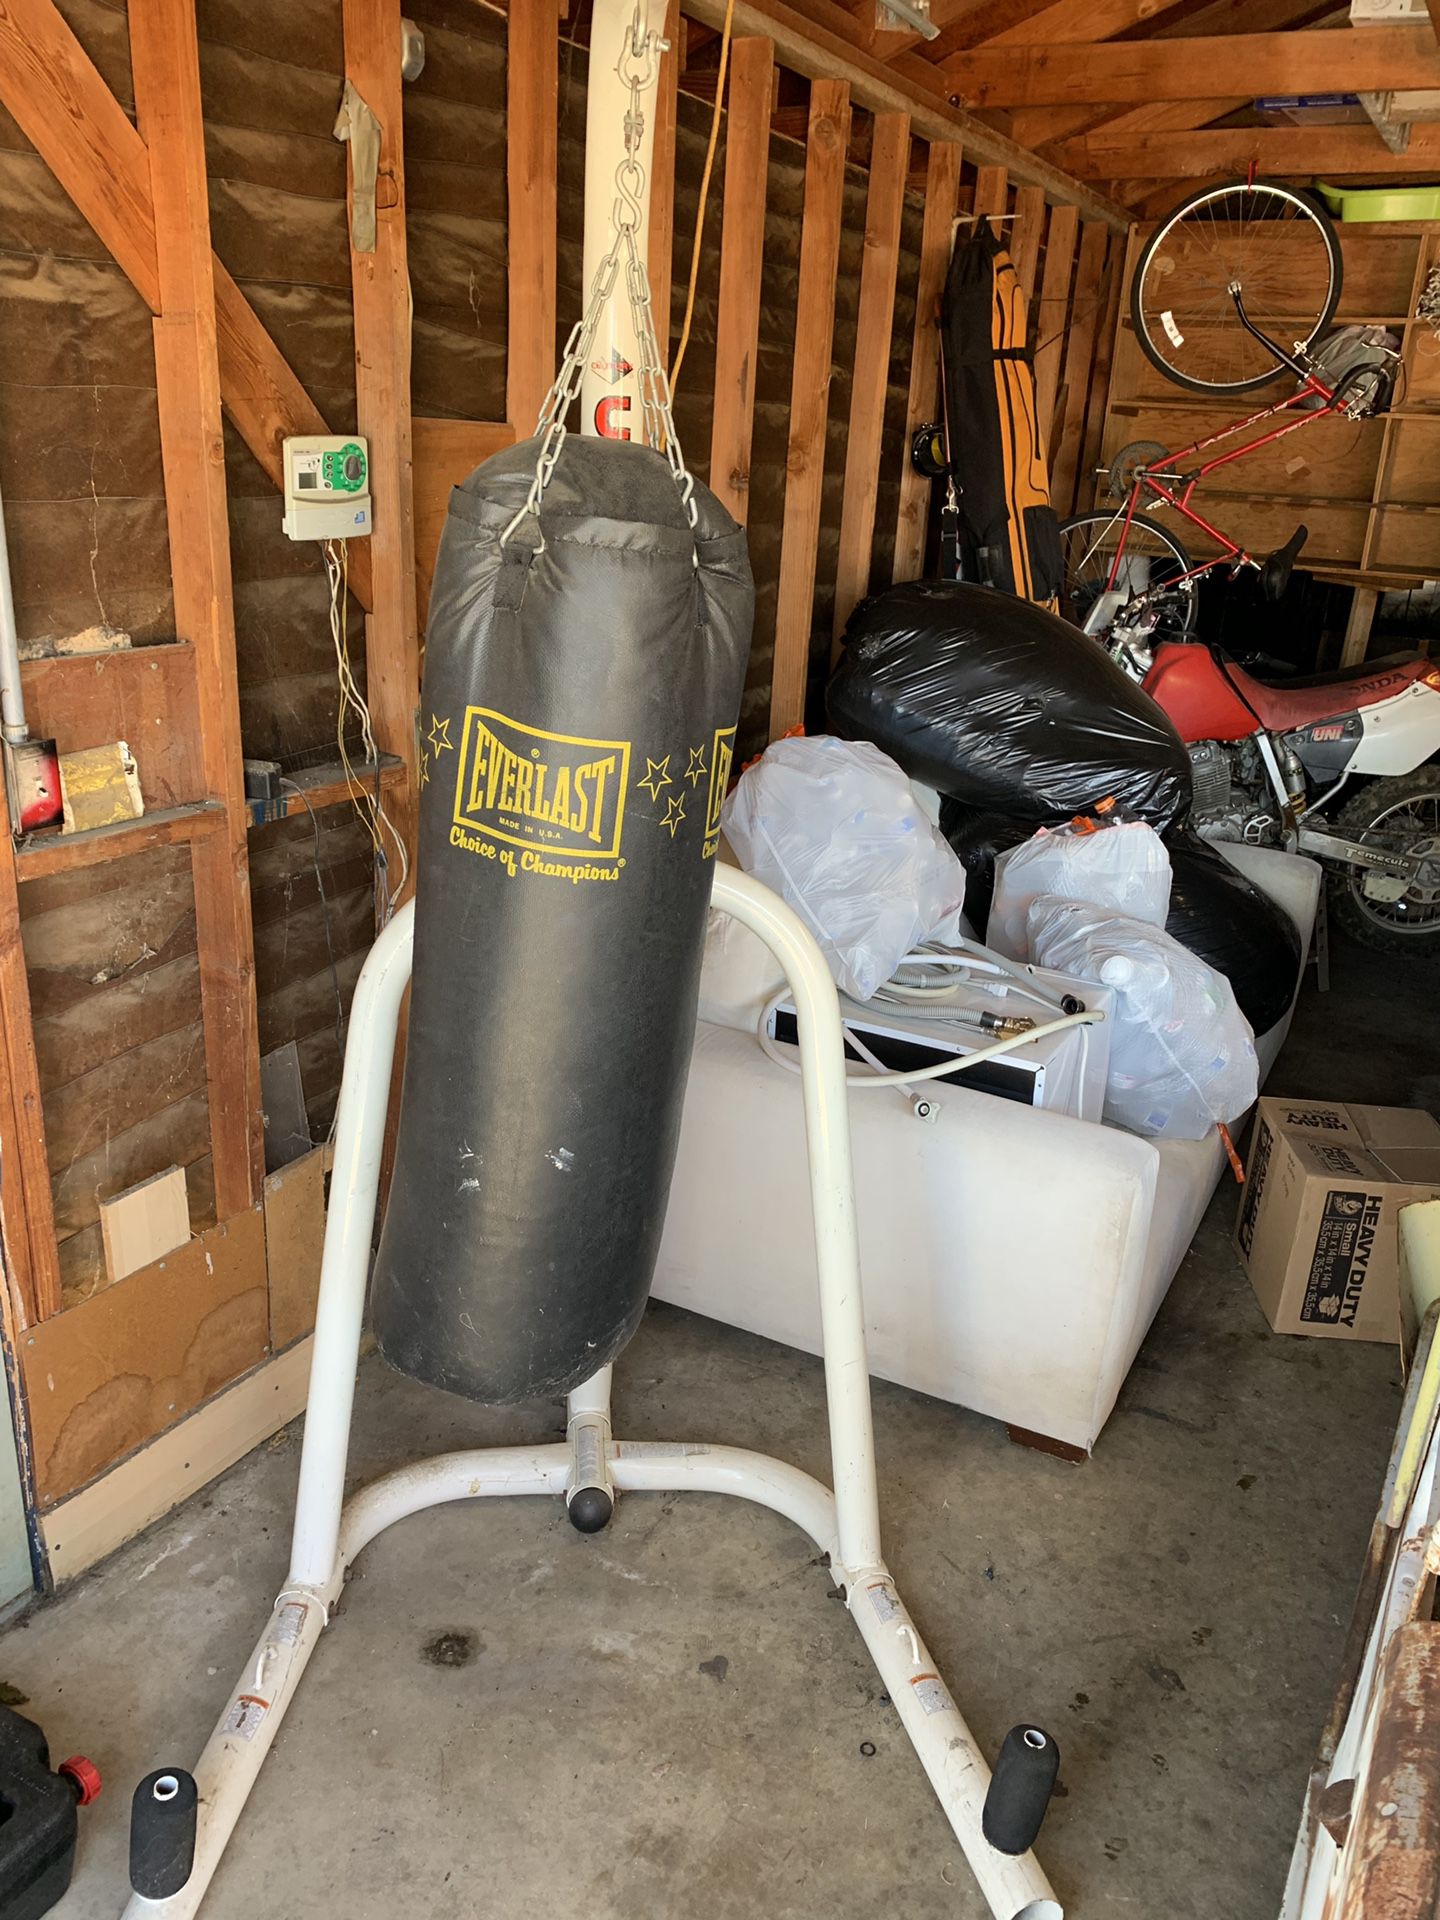 Everlast punching bag with speed bag